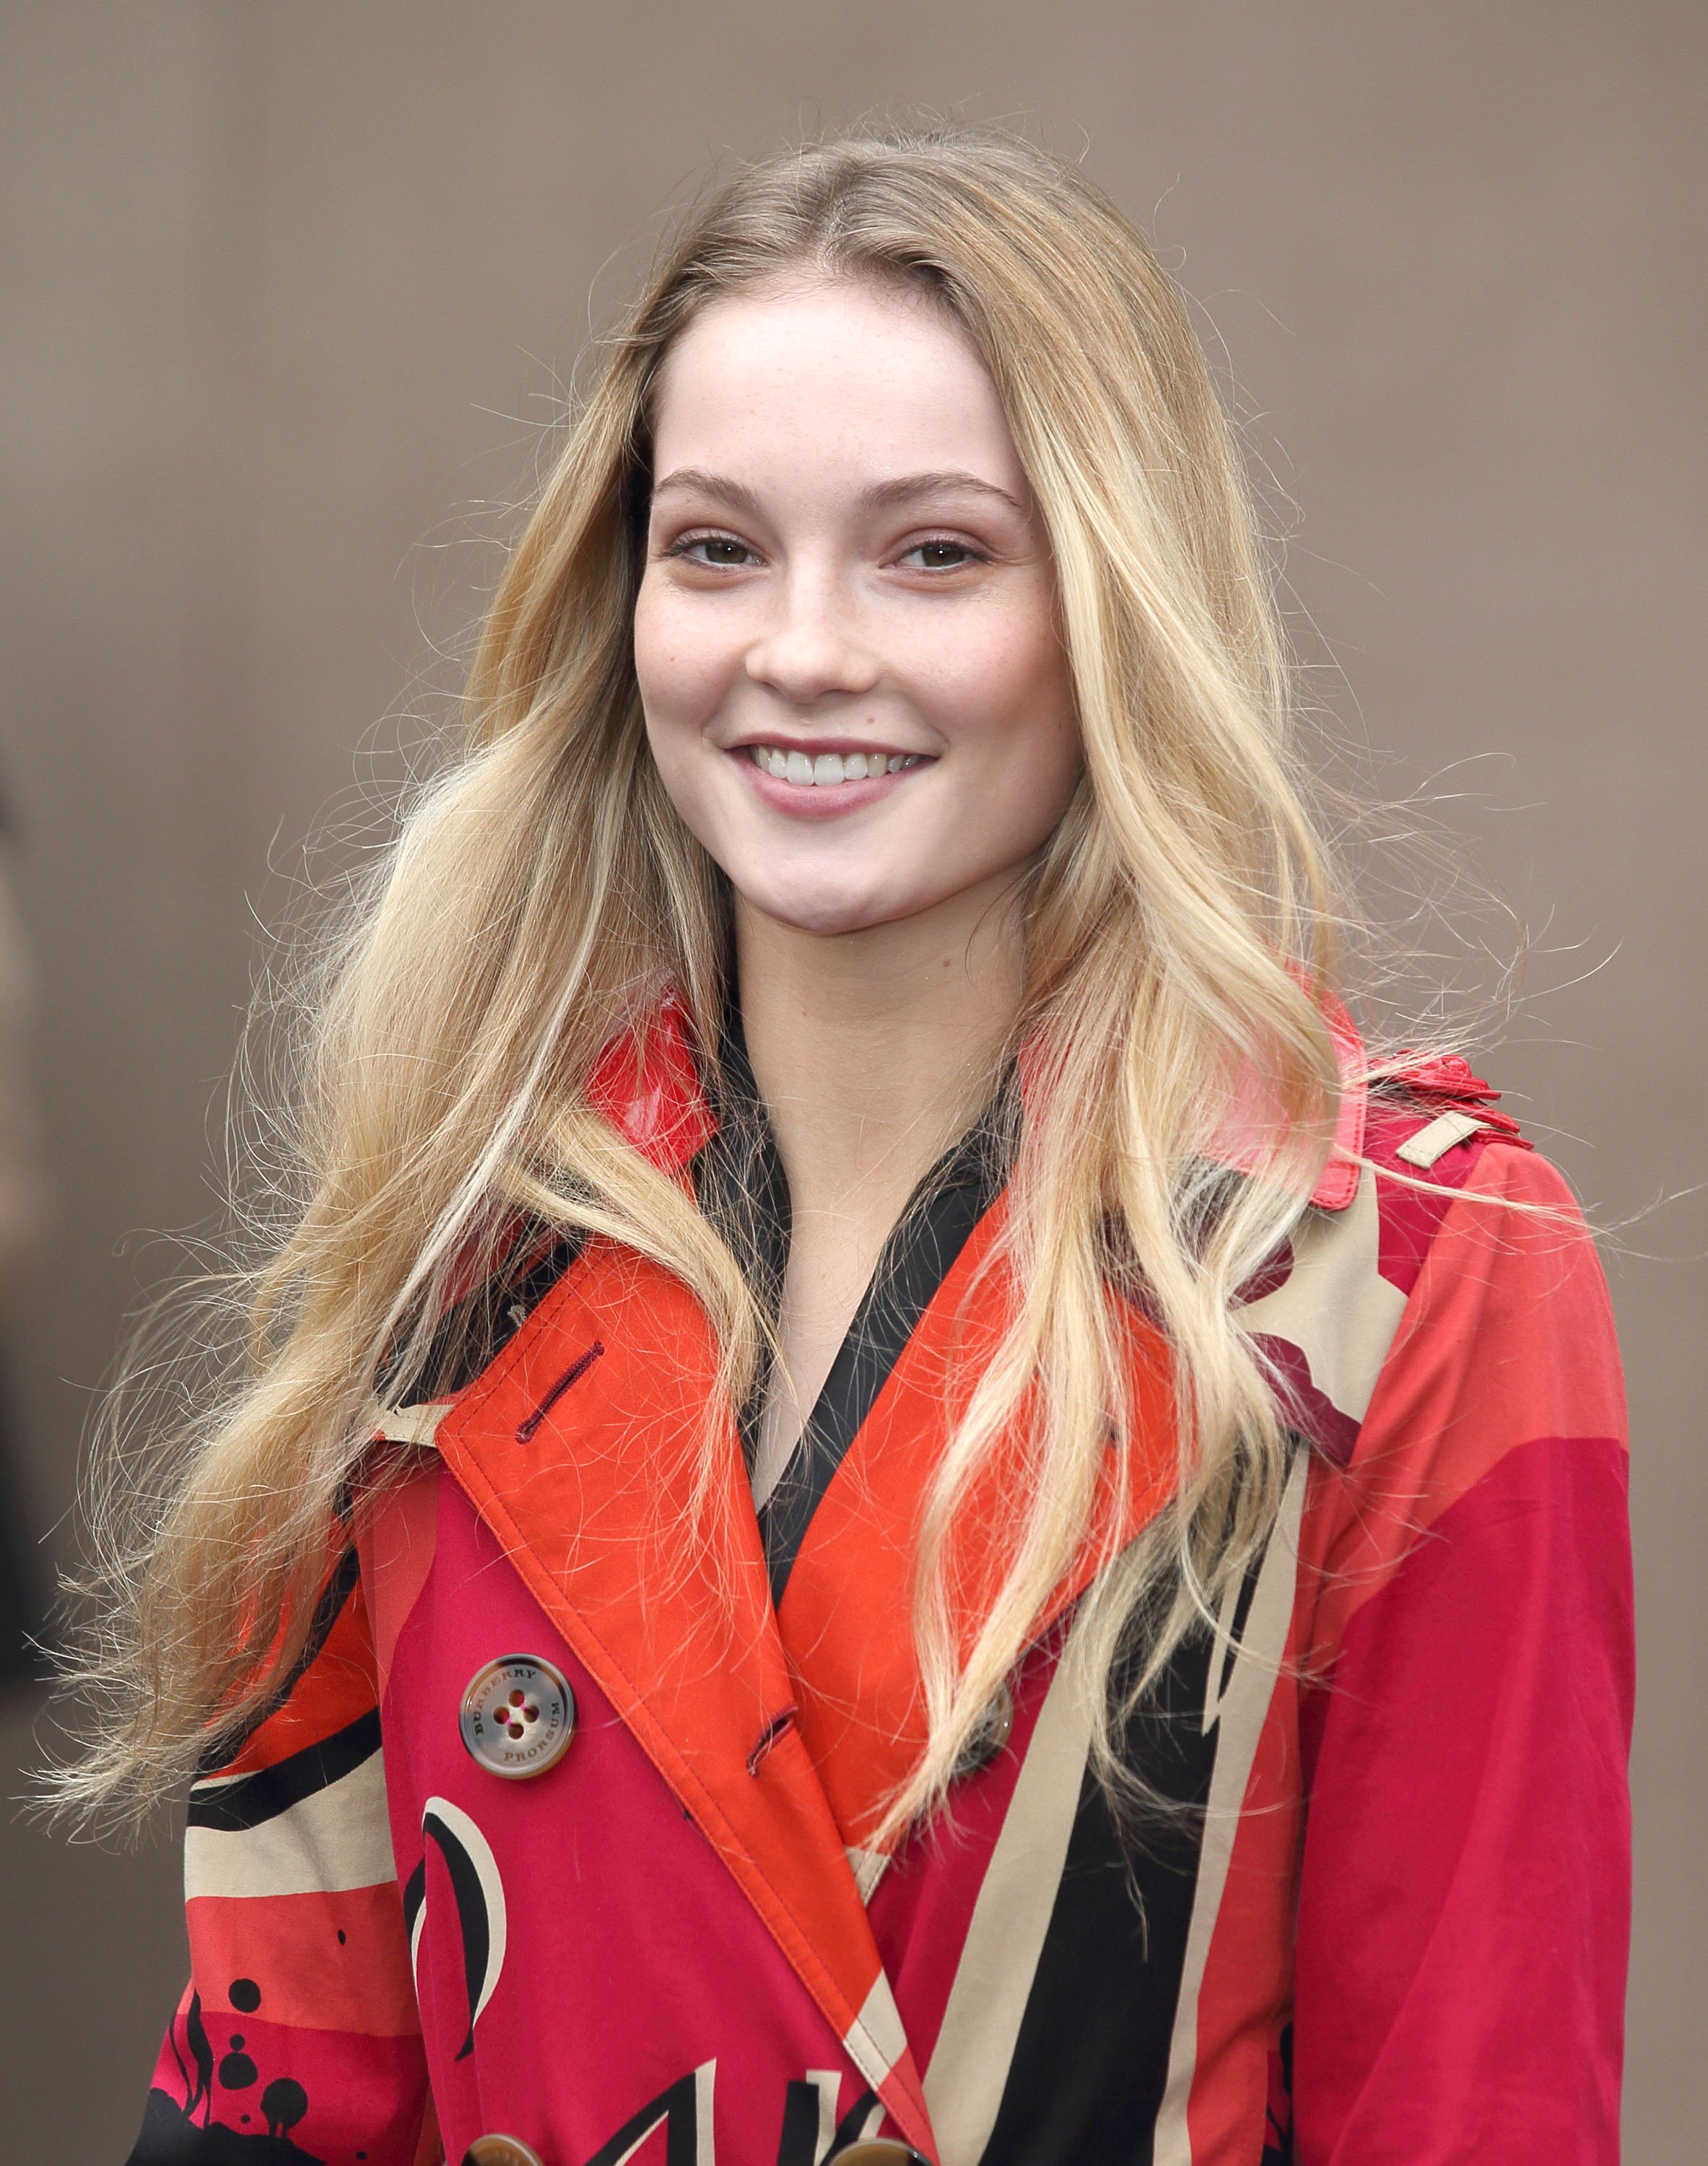 Hannah Dodd at the Burberry Prorsum show on January 12, 2015 in London. | Getty Images